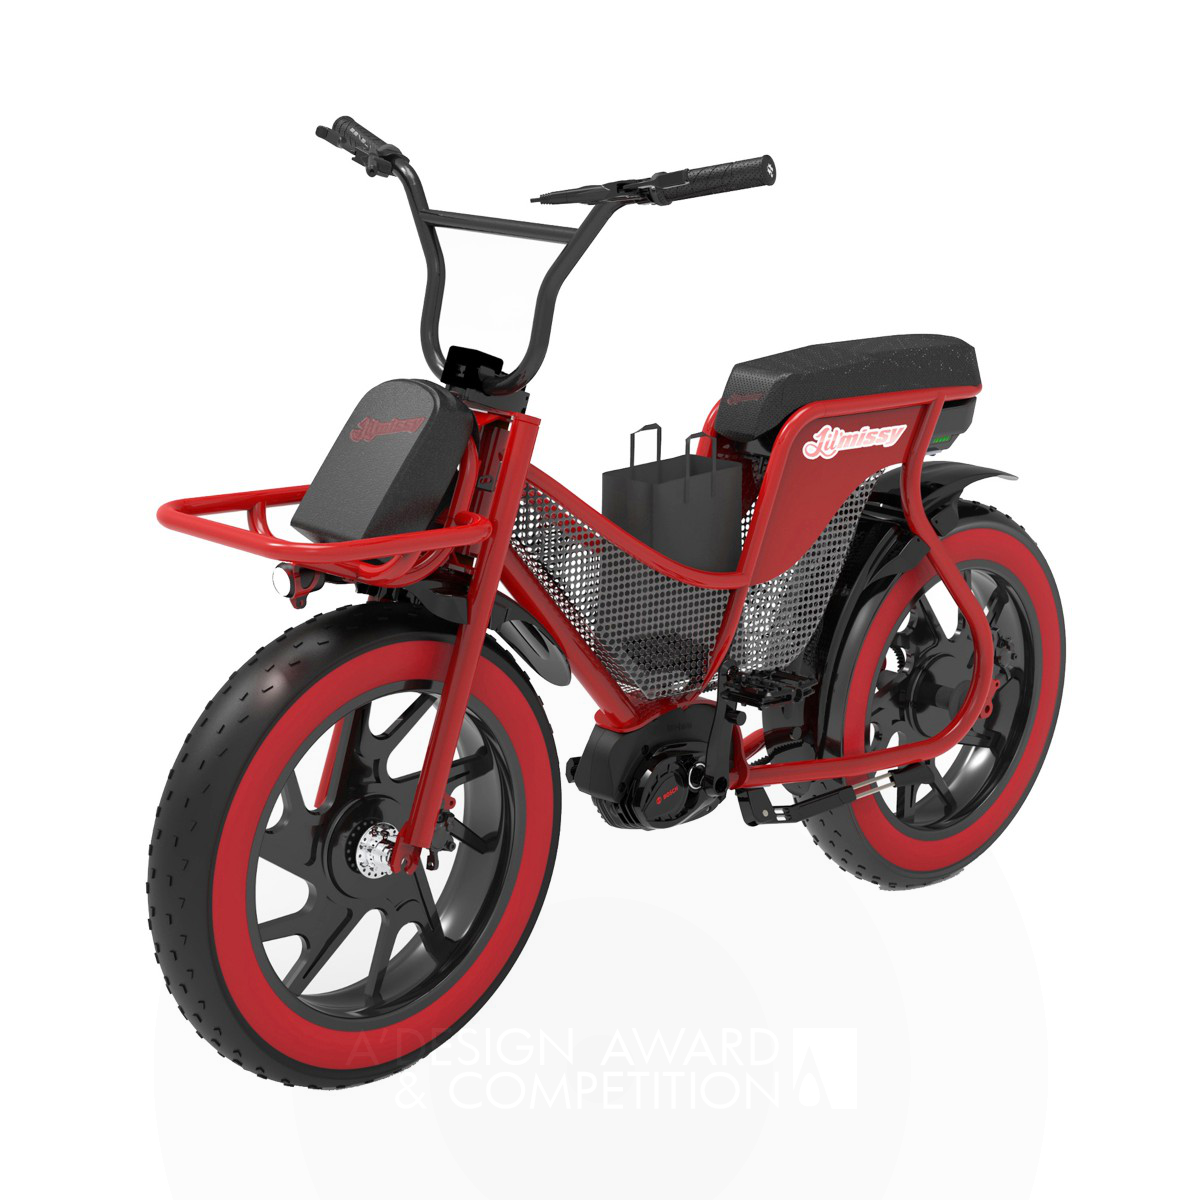 Lilmissy <b>Electric Bicycle